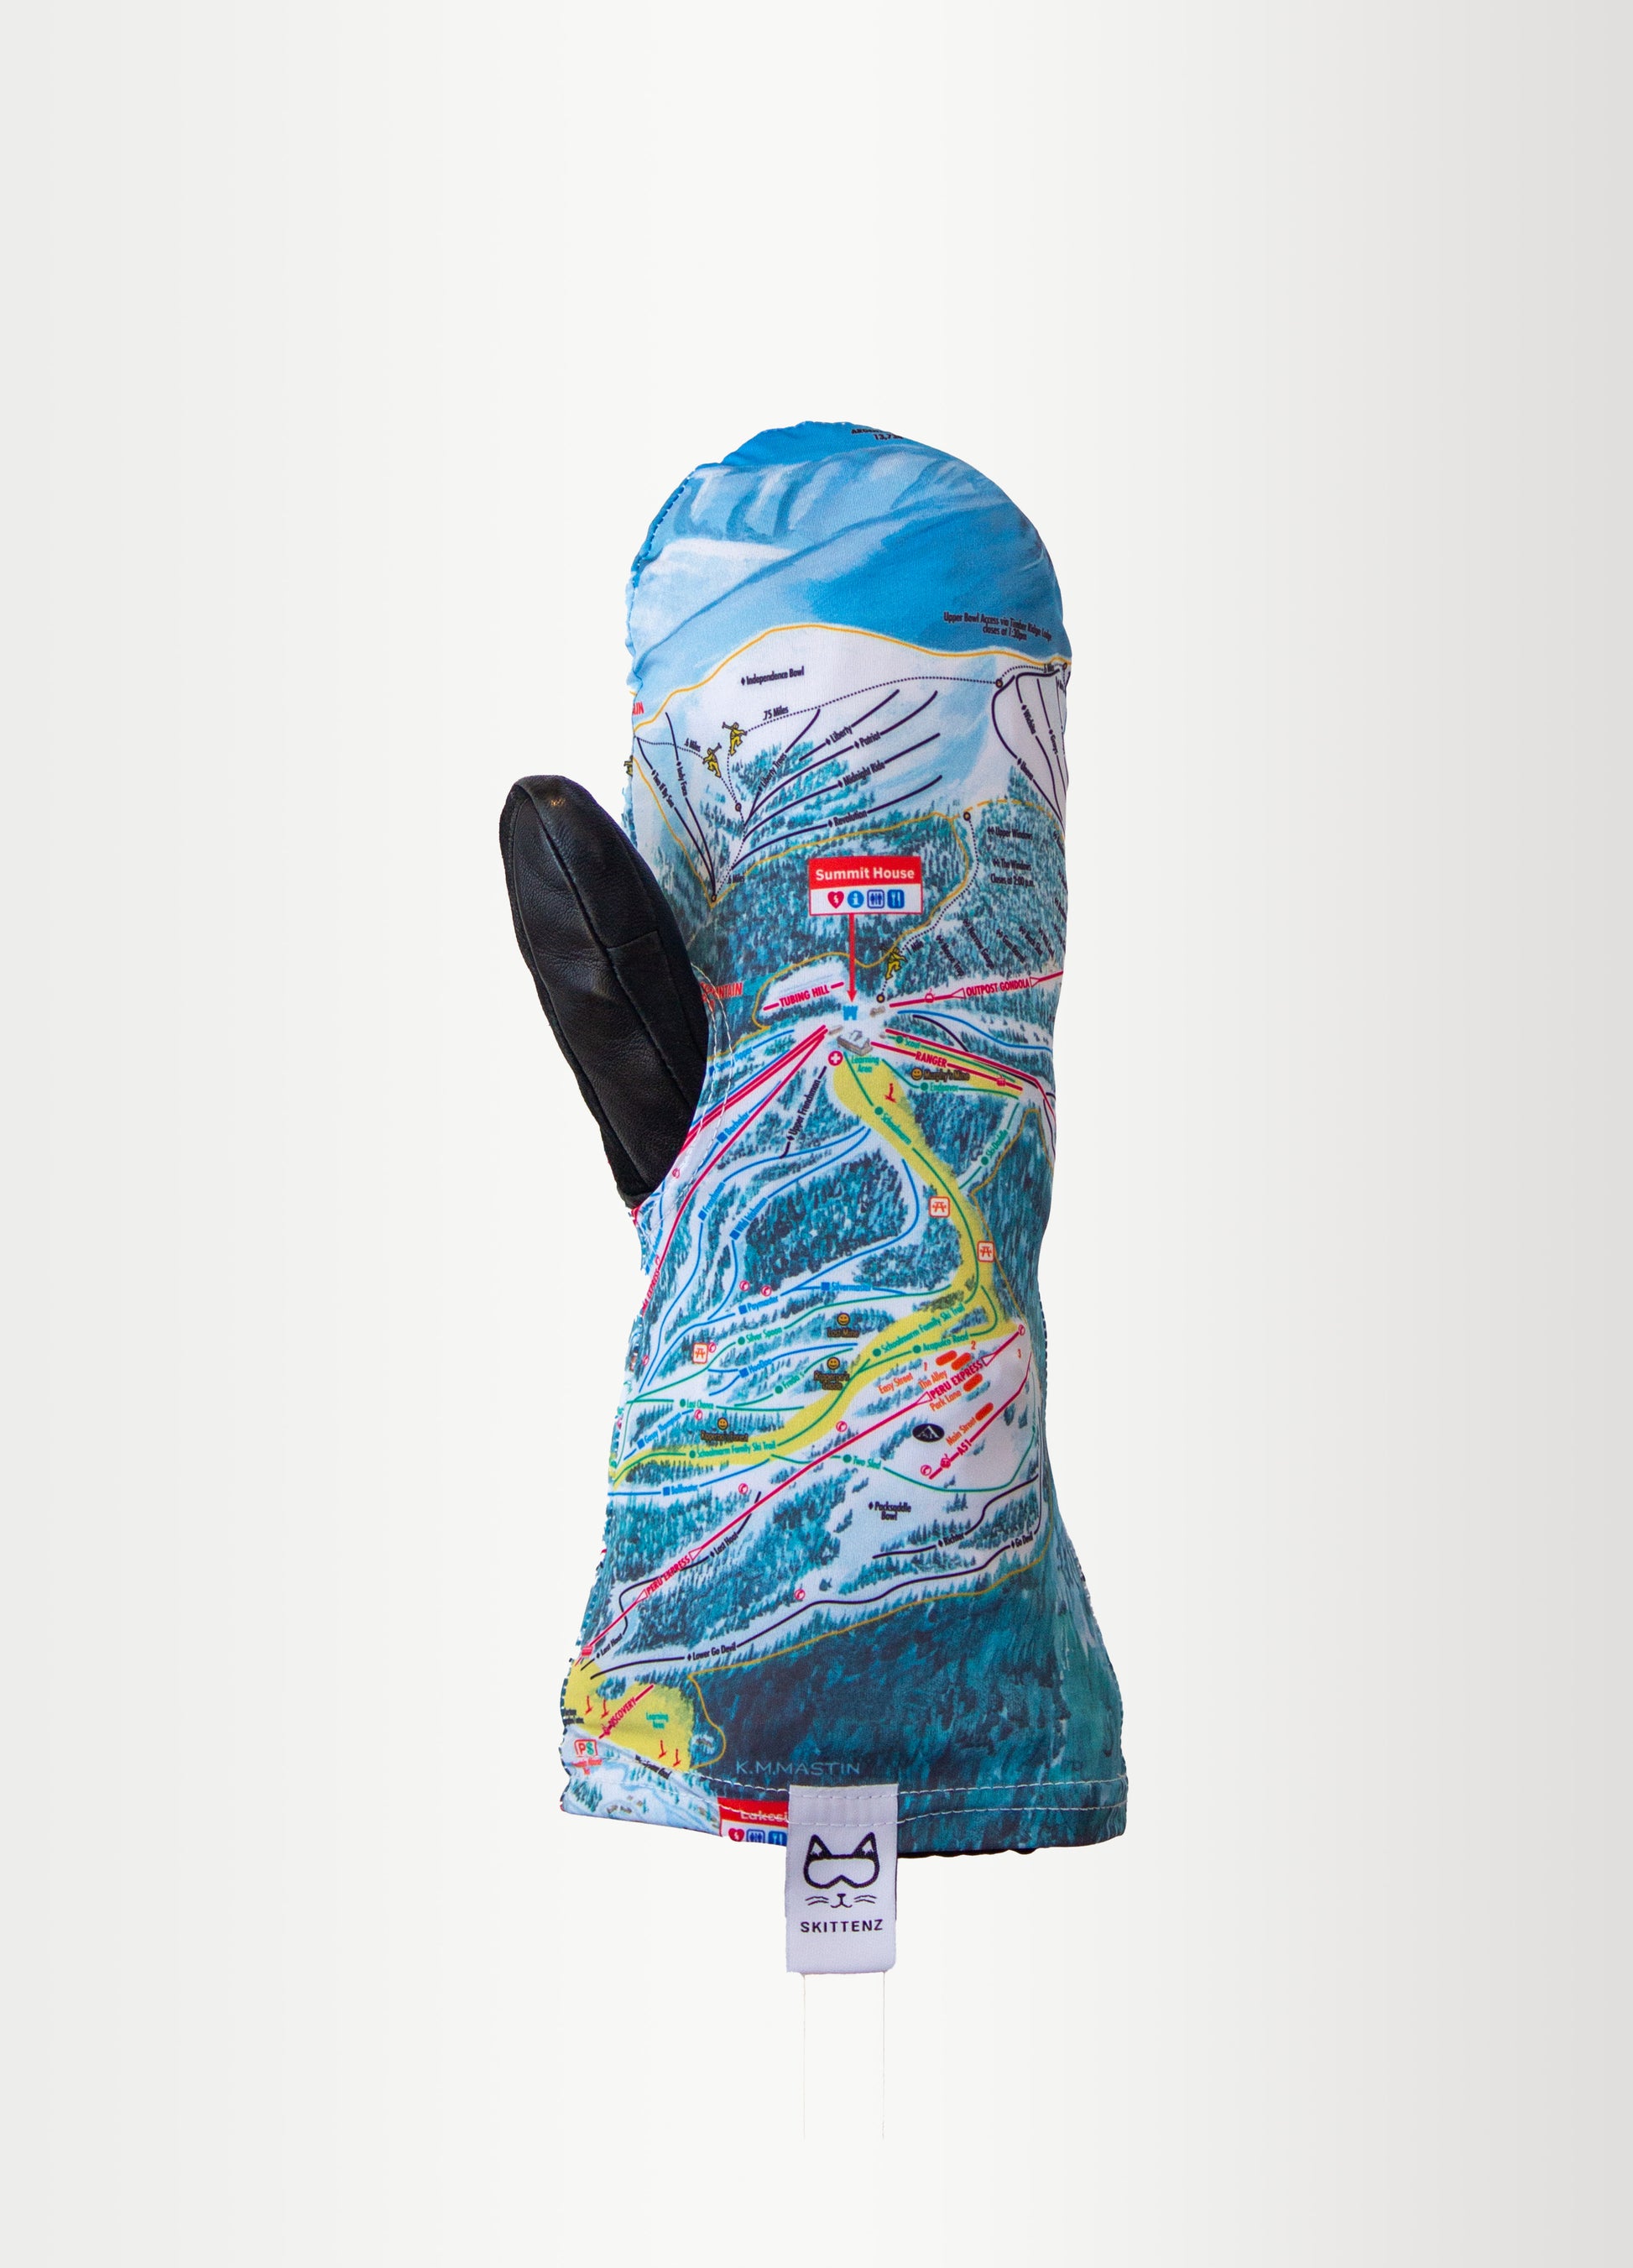 Keystone Ski or Snowboard Trail Map Skins for Mittens or Gloves